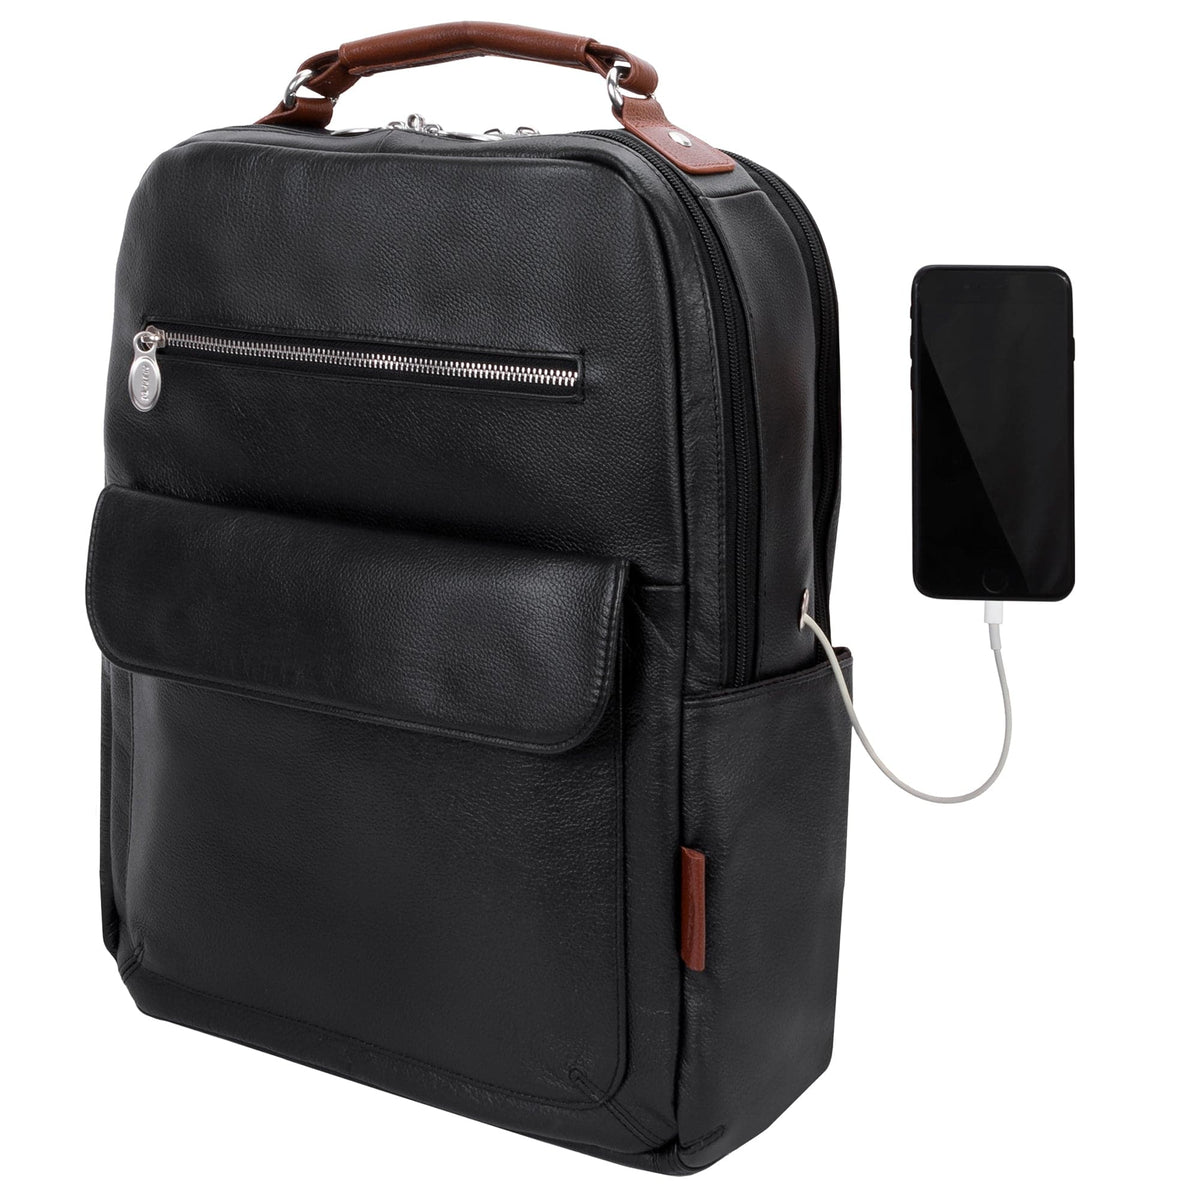 McKlein U Series Logan 17" Two-Tone Dual-Compartment Laptop and Tablet Leather Backpack